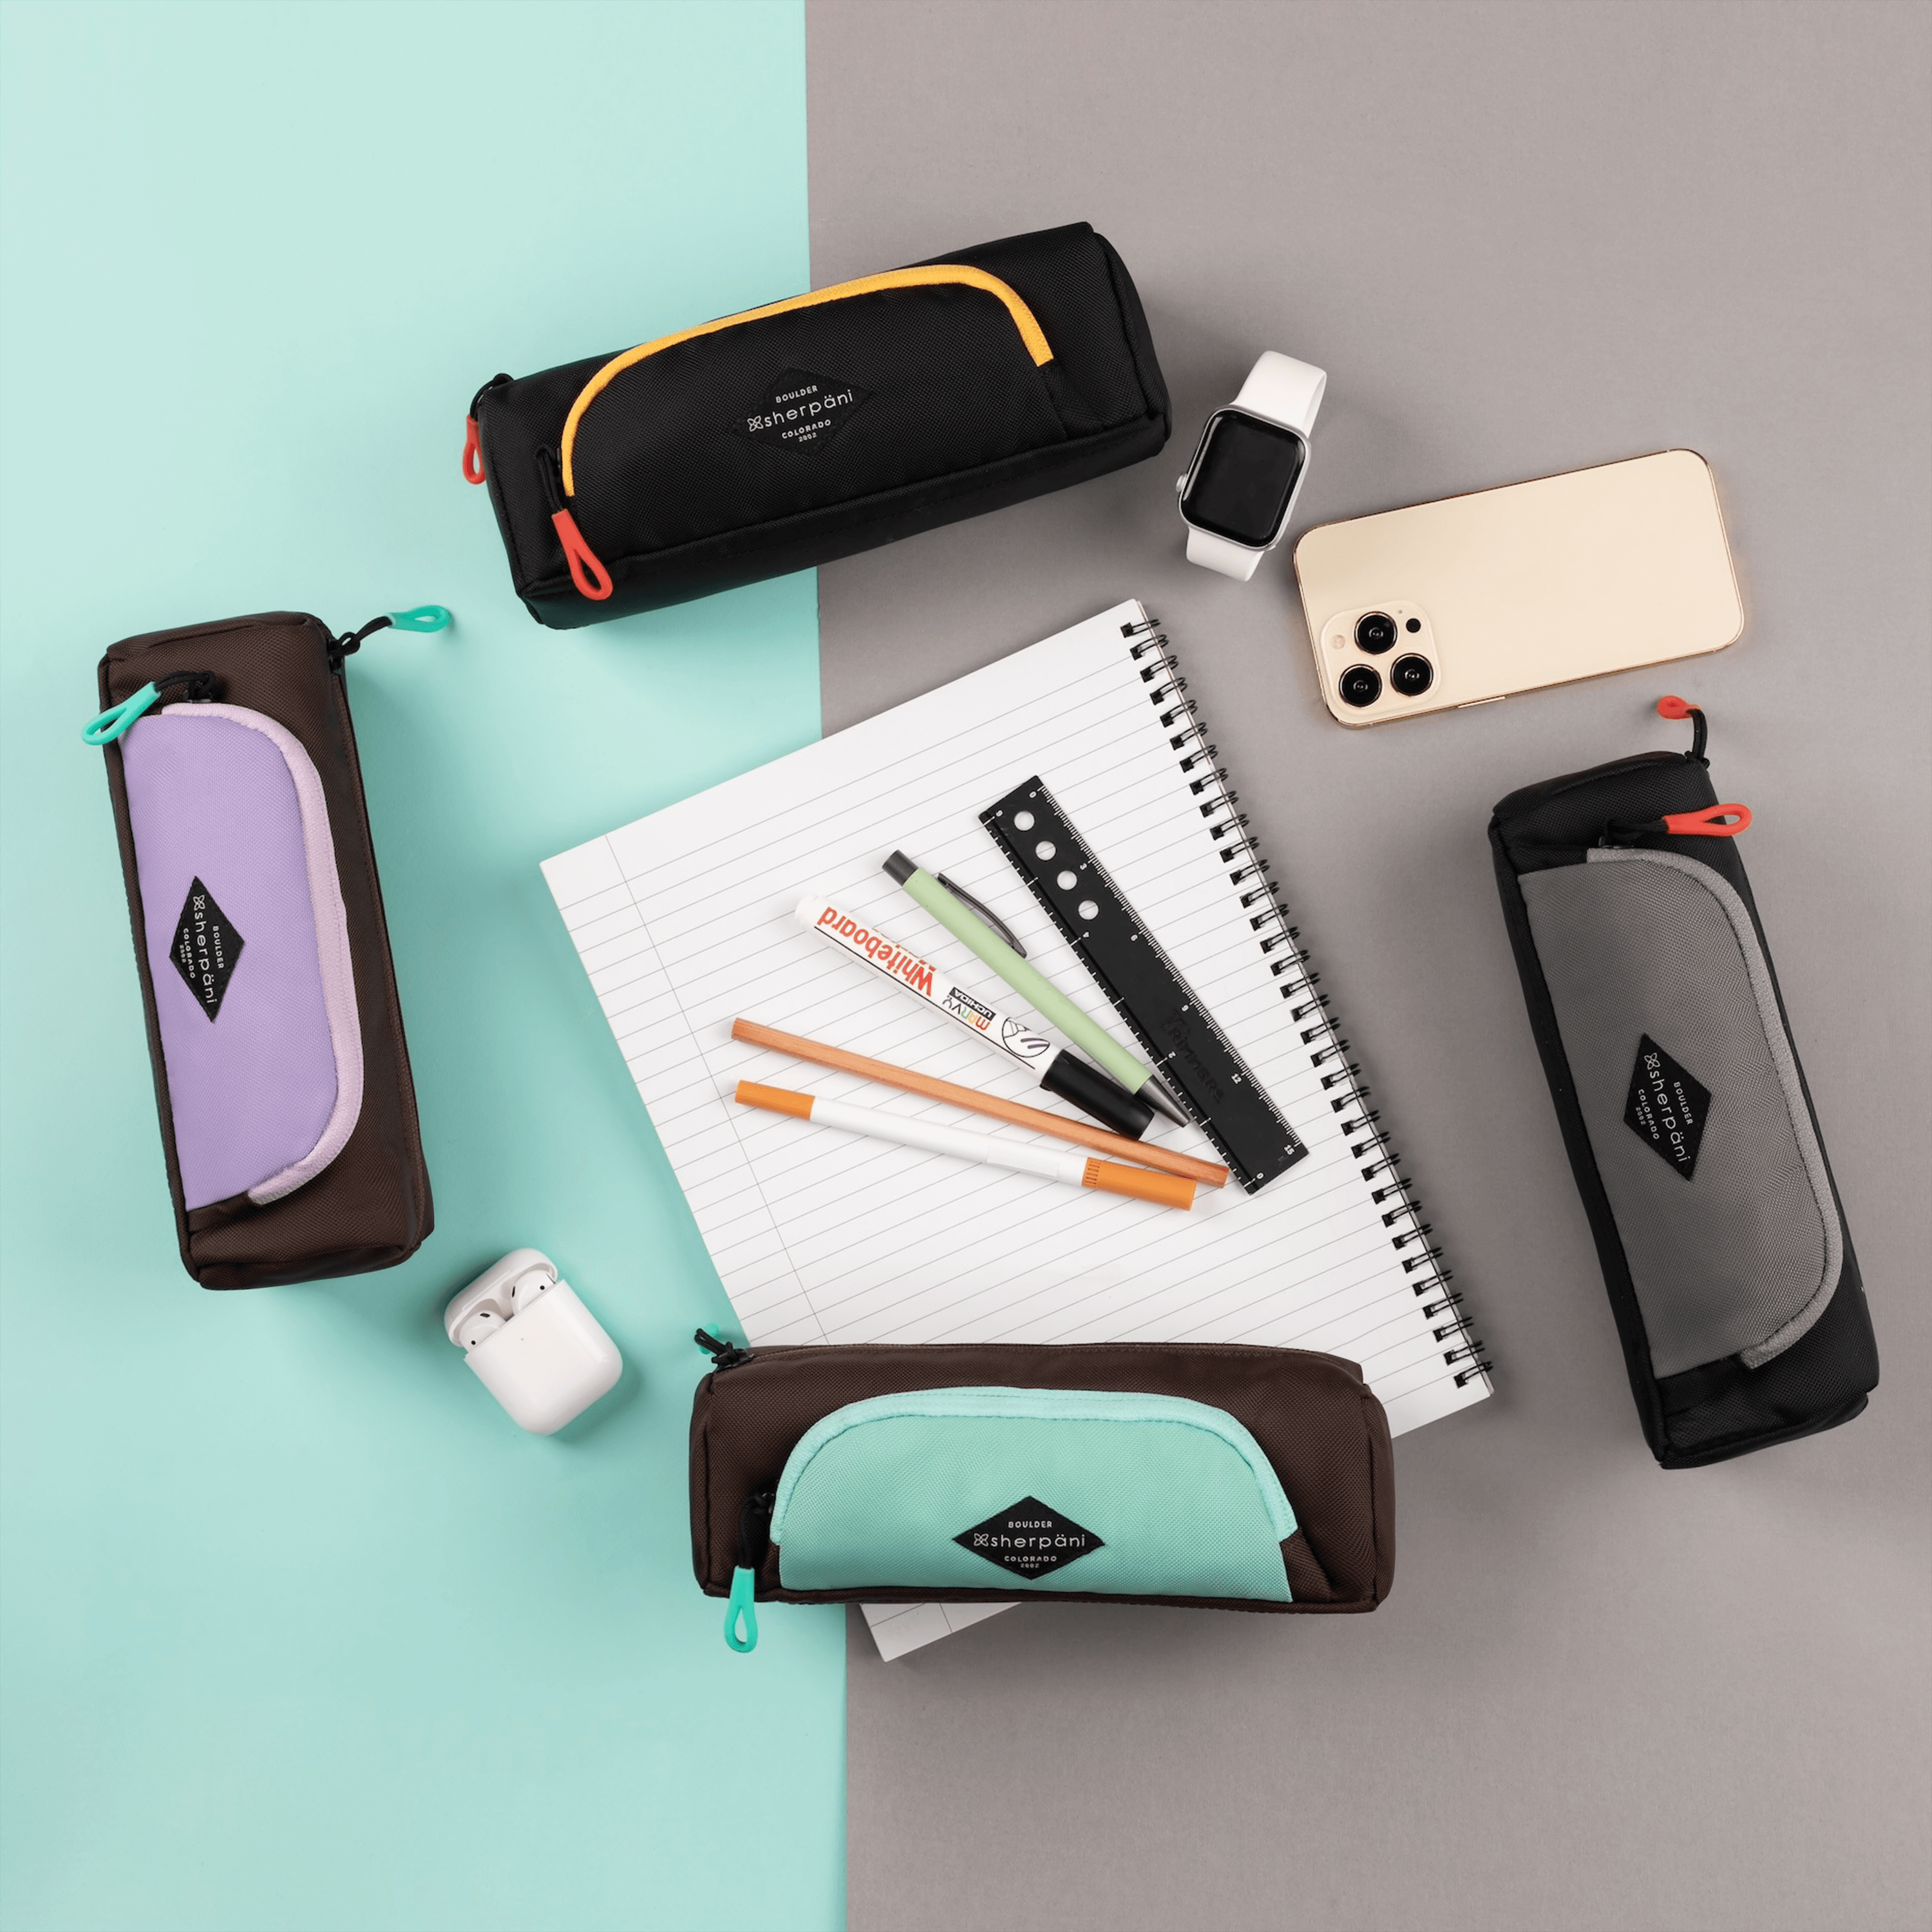 Top view of four Shepani travel accessories arranged in a circle along with example items for their use. Everything lies on a green and gray backdrop. Clockwise from upper left: Poet in Chromatic, smart watch, phone, Jolie in Stone, Jolie in Seagreen, AirPods, Jolie in Lavender. In the center lies a notebook and markers. #color_seagreen